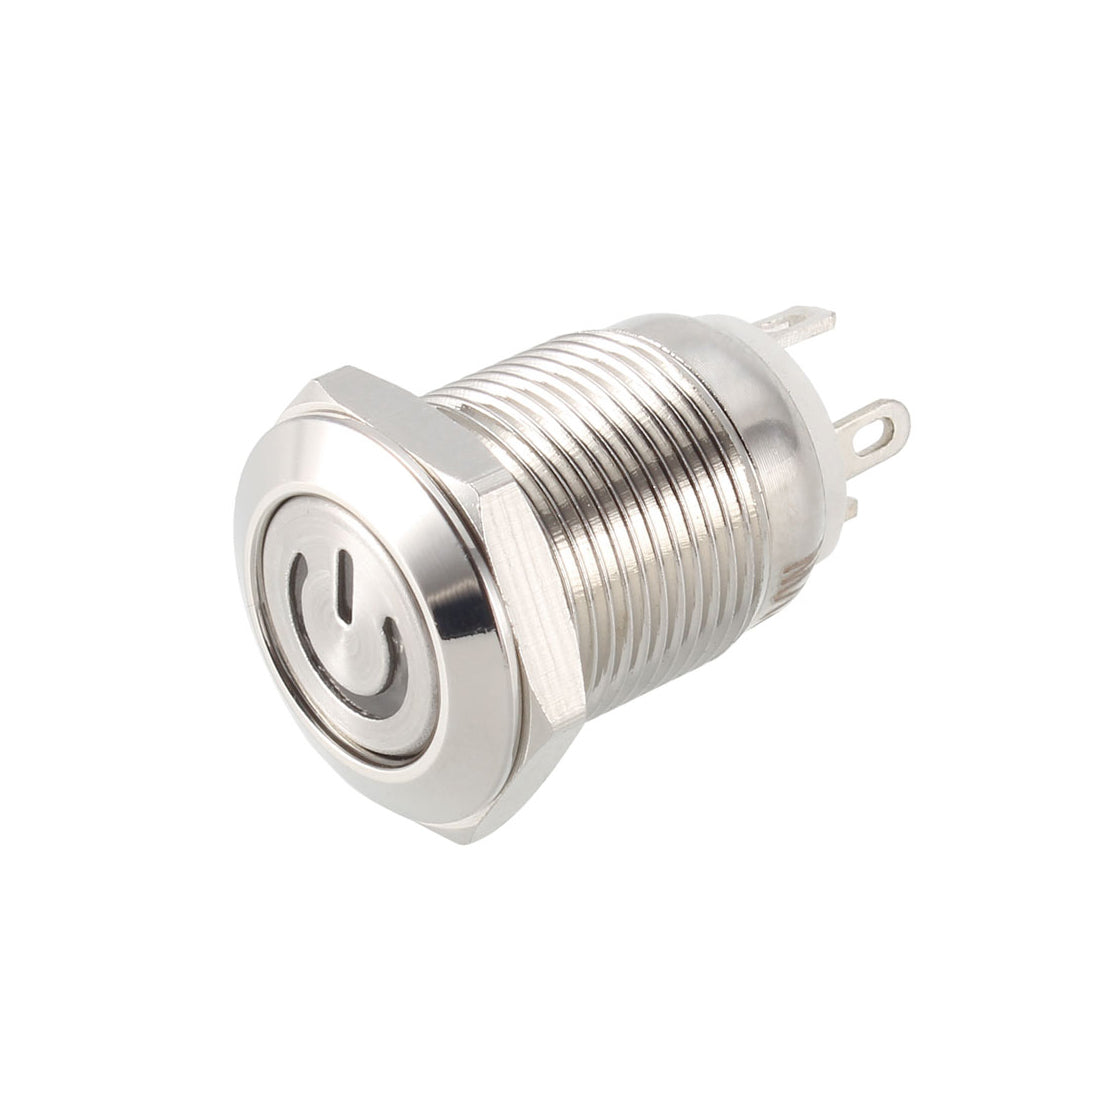 uxcell Uxcell Momentary Metal Push Button Switch Flat Head 12mm Mounting Dia 1NO 12V LED Light